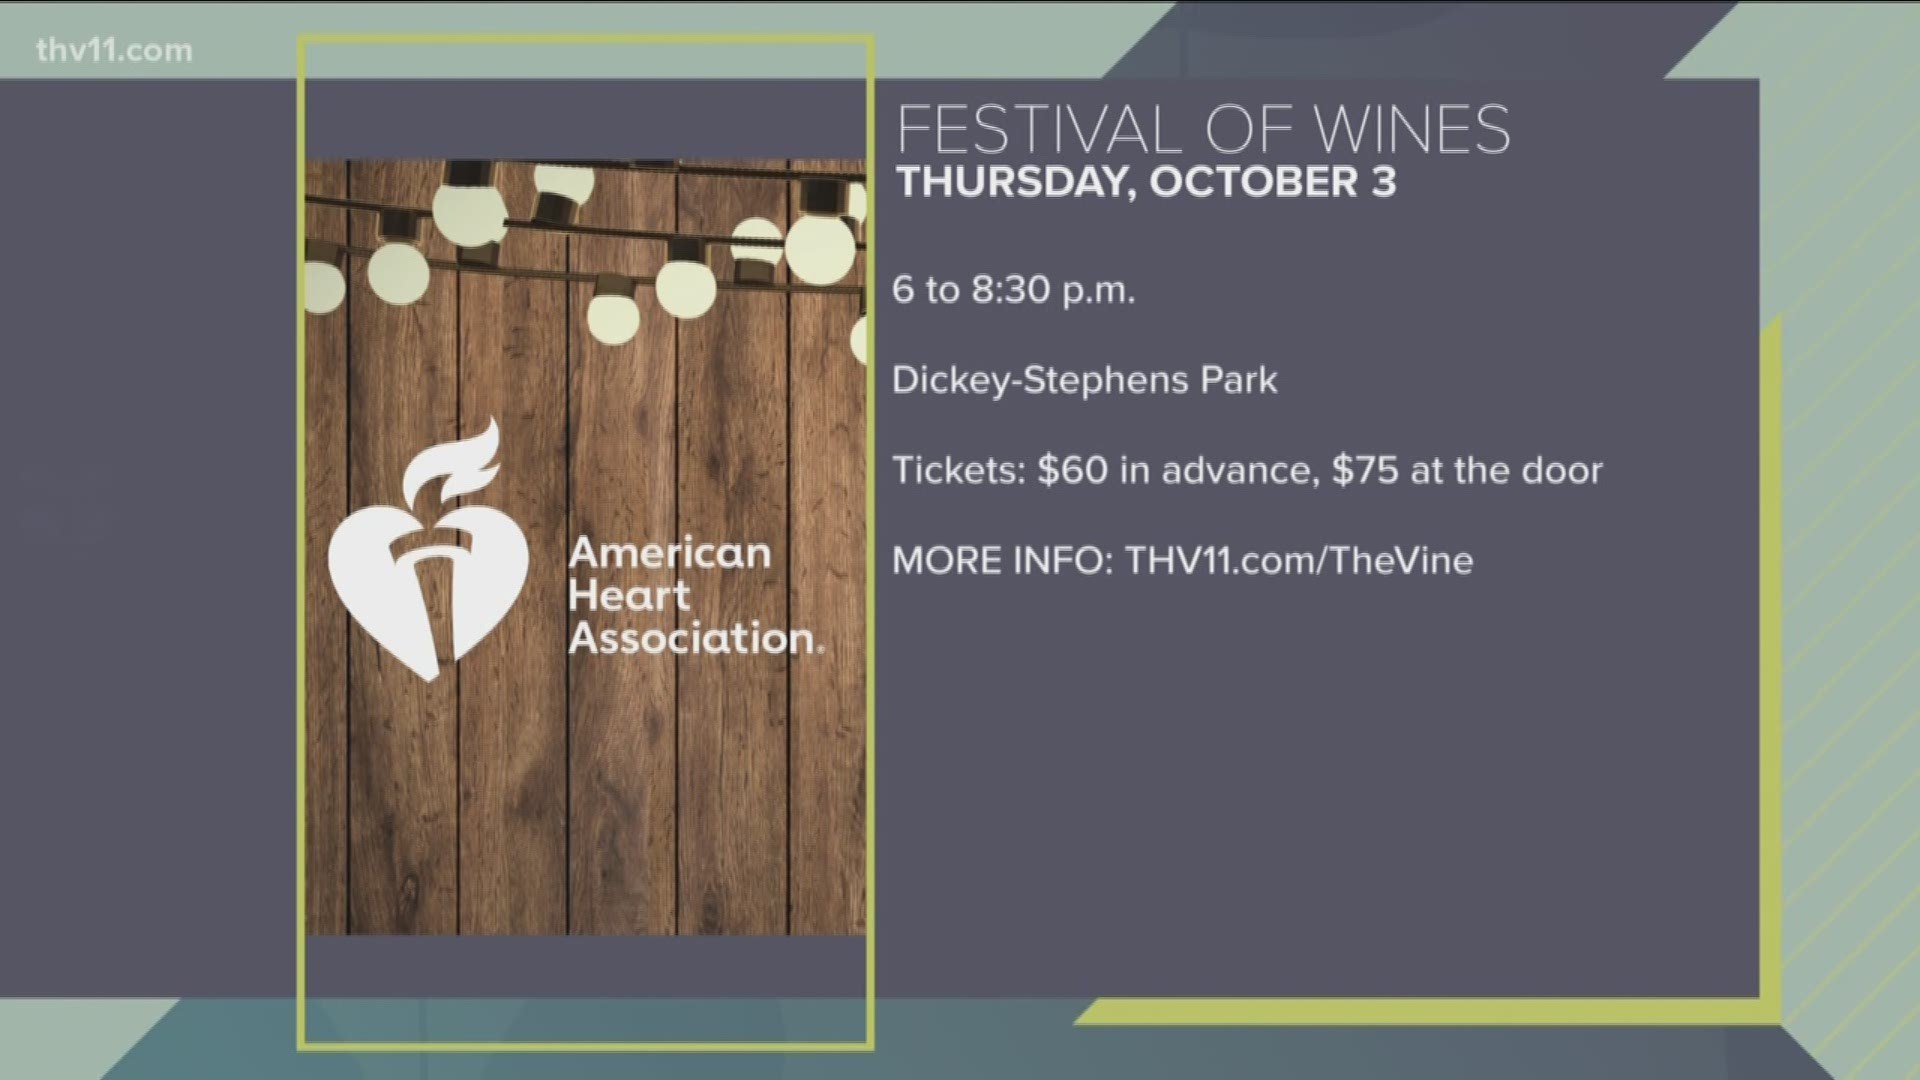 We are less than 2 weeks away from the American Heart Association's Festival of Wines.